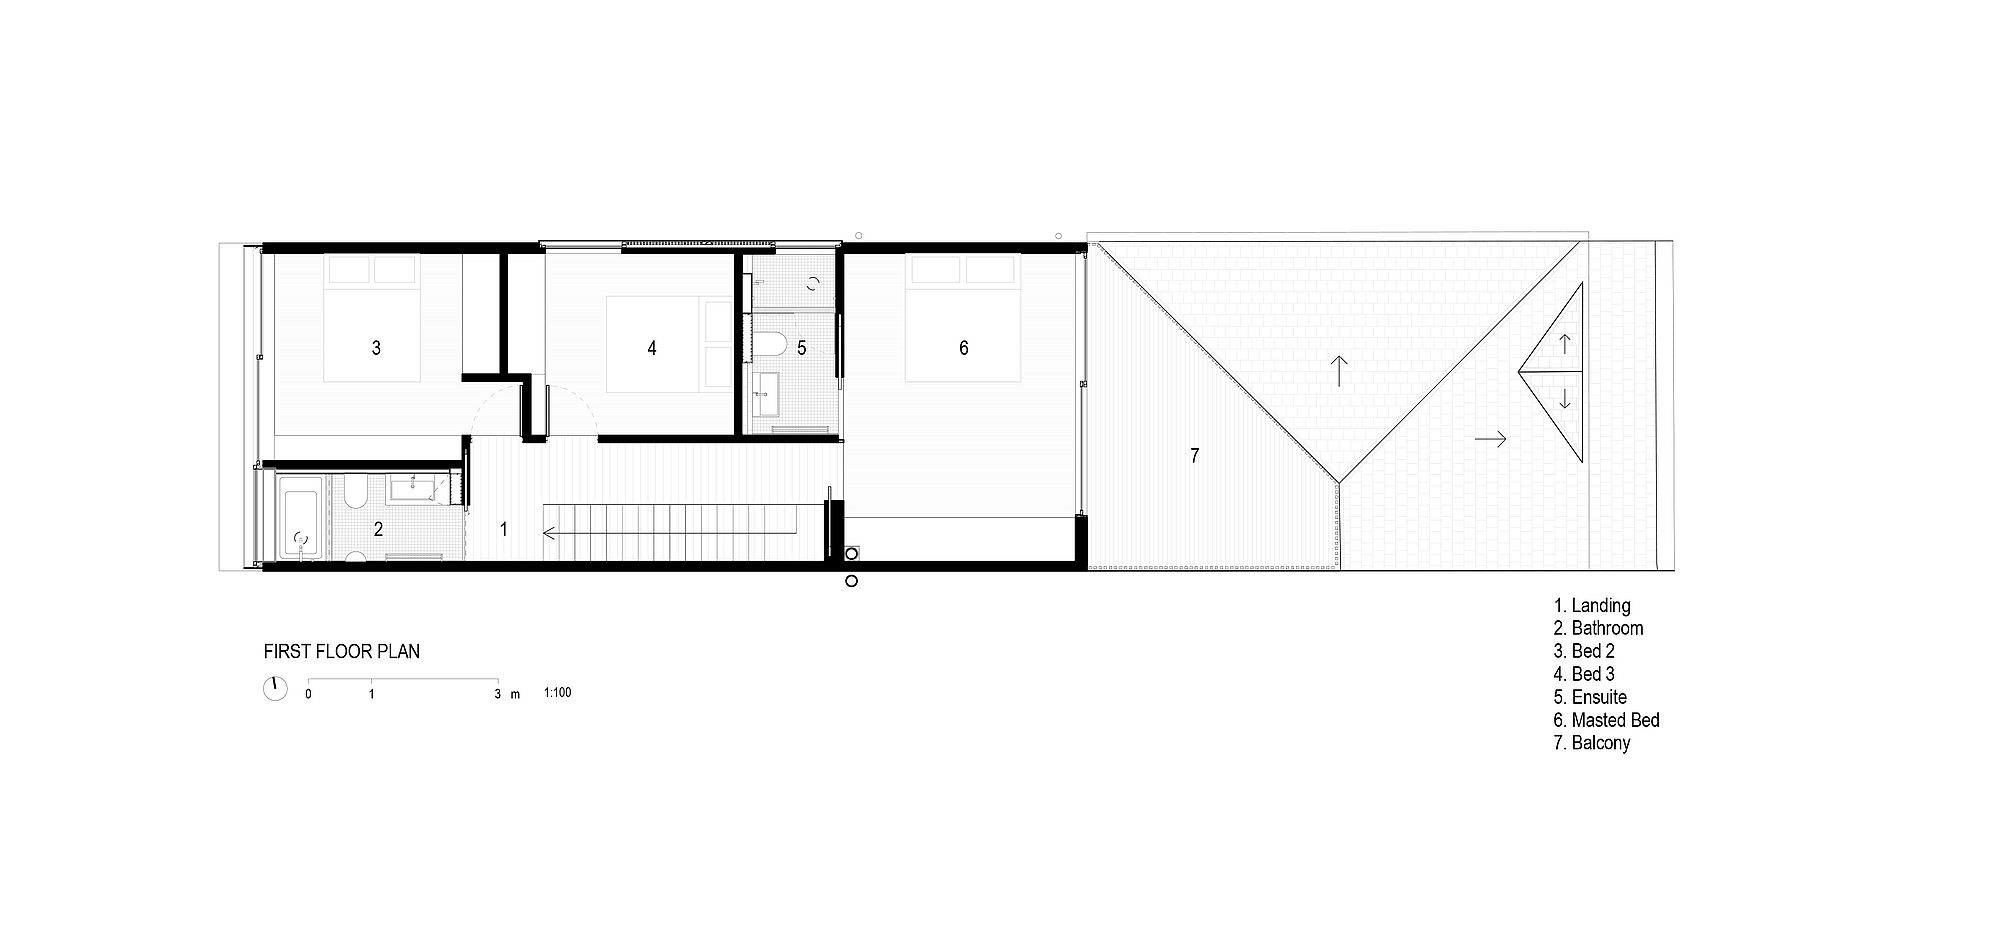 Upper level floor plan with rear extension holding the bedrooms